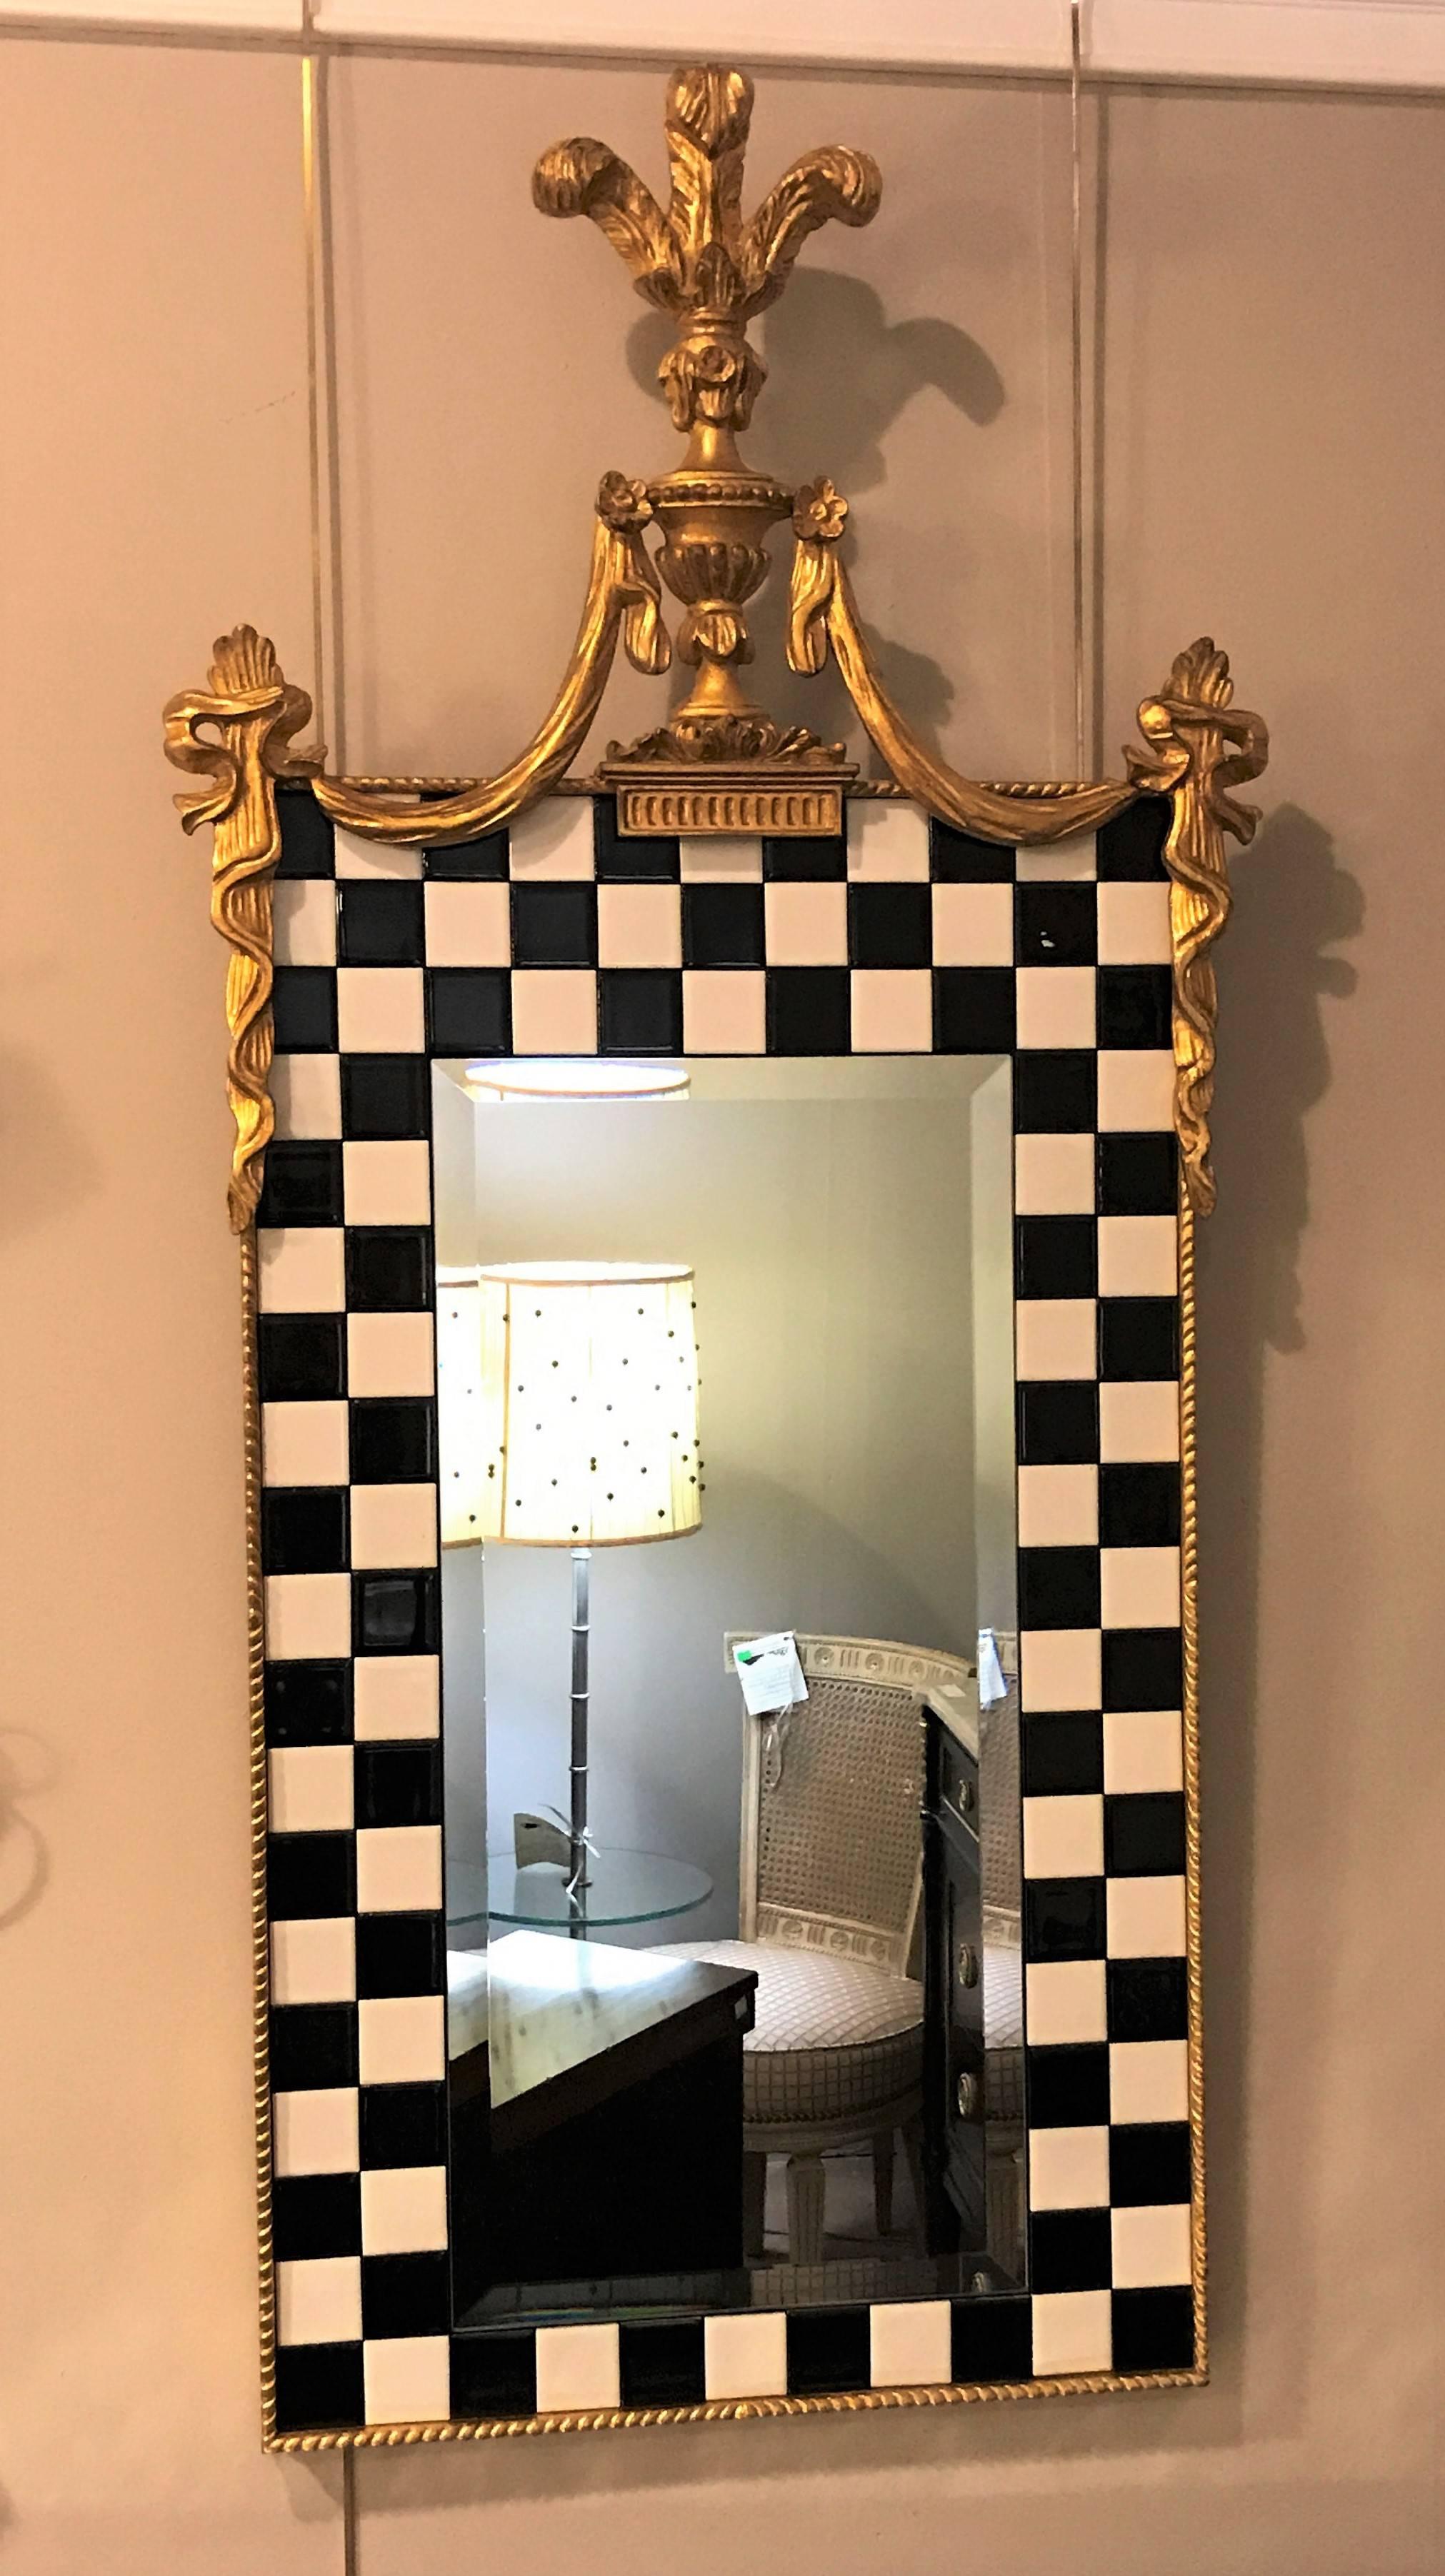 A carvers guild company gilt gold and checker board decorated mirror. This Hollywood Regency style gilt wall or console mirror is finely decorated with a rope carved border outside of the checkerboard porcelain decorated frame. The beveled centre